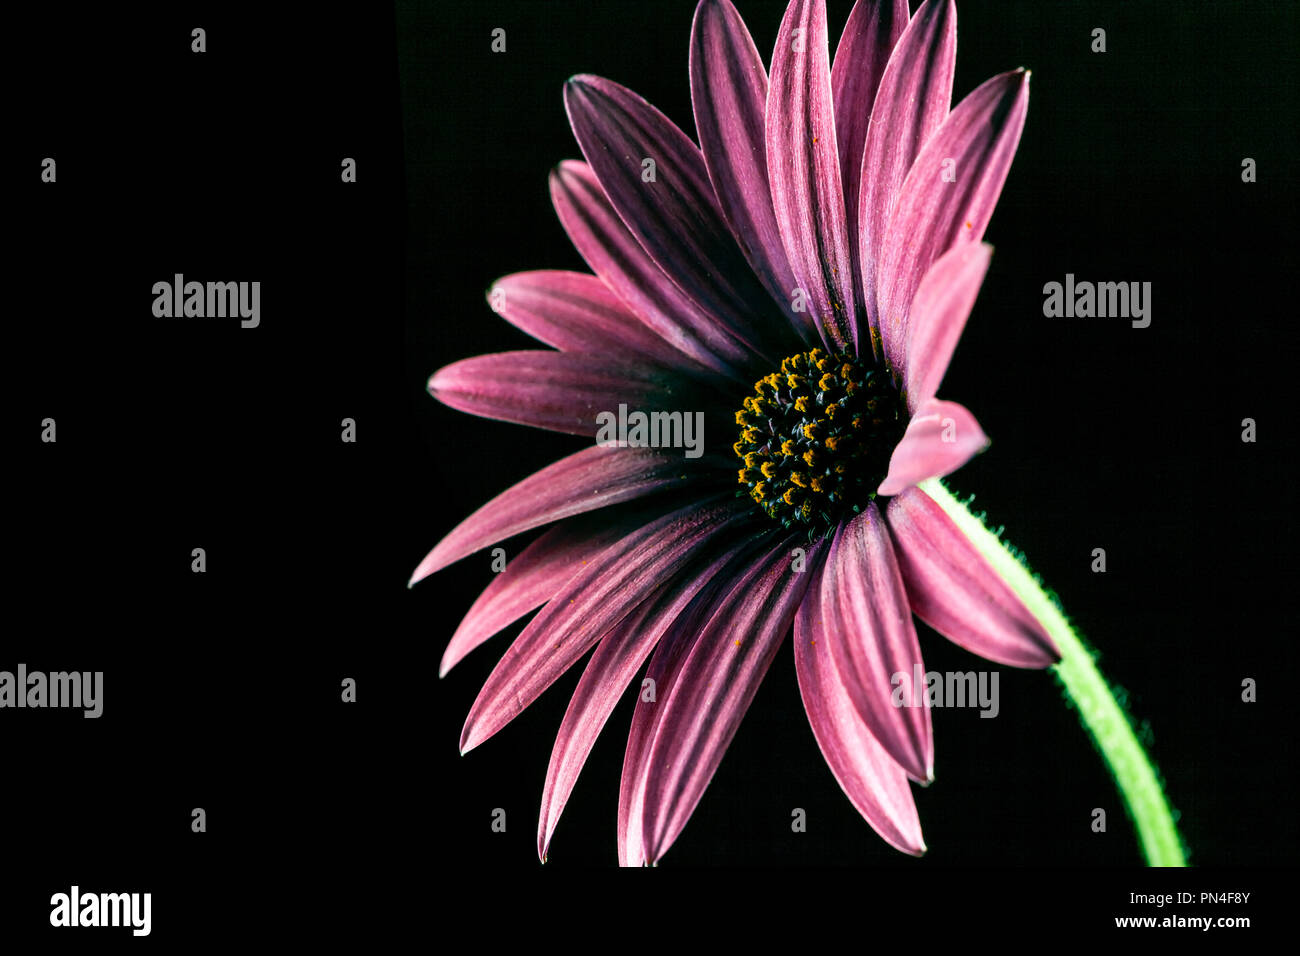 African daisy glowing on dark background with copy space Stock Photo